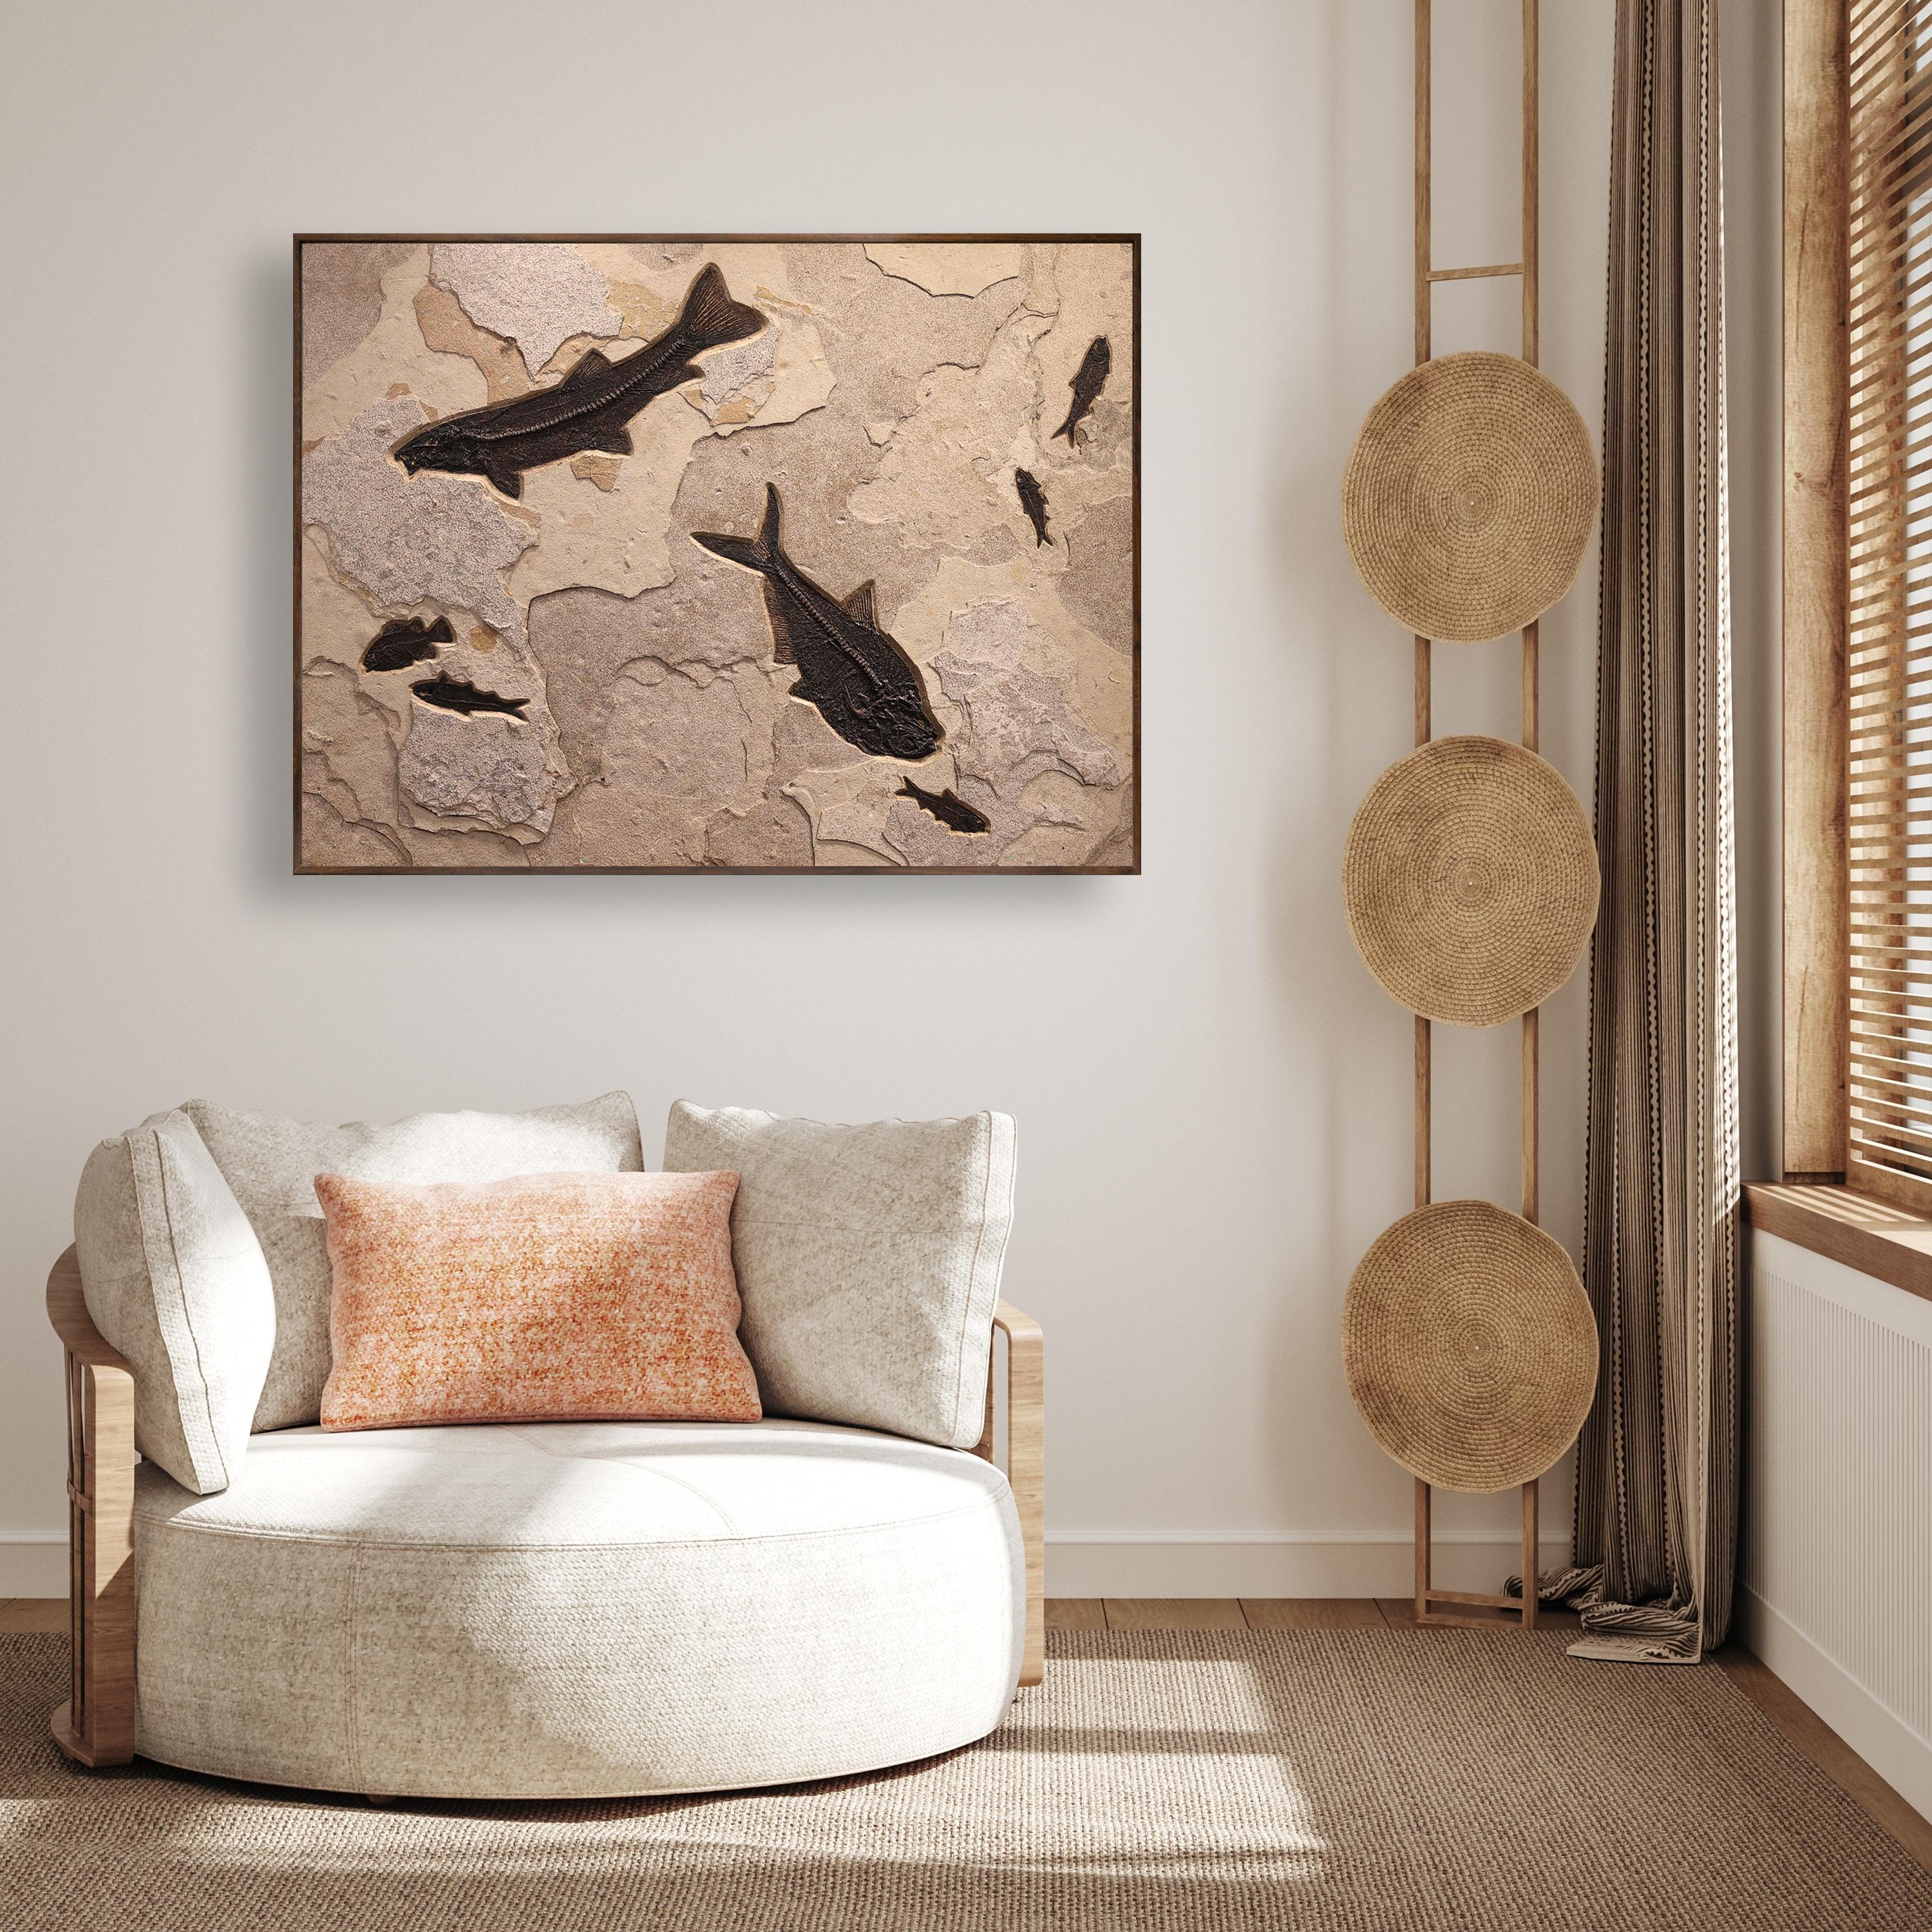 This sculptural stone mural features an array of Eocene era fossil fish from the Green River Formation: one Notogoneus osculus, one Diplomystus dentatus, one Cockerellites liops (formerly known as Priscacara), and a few Knightia eocaena. These